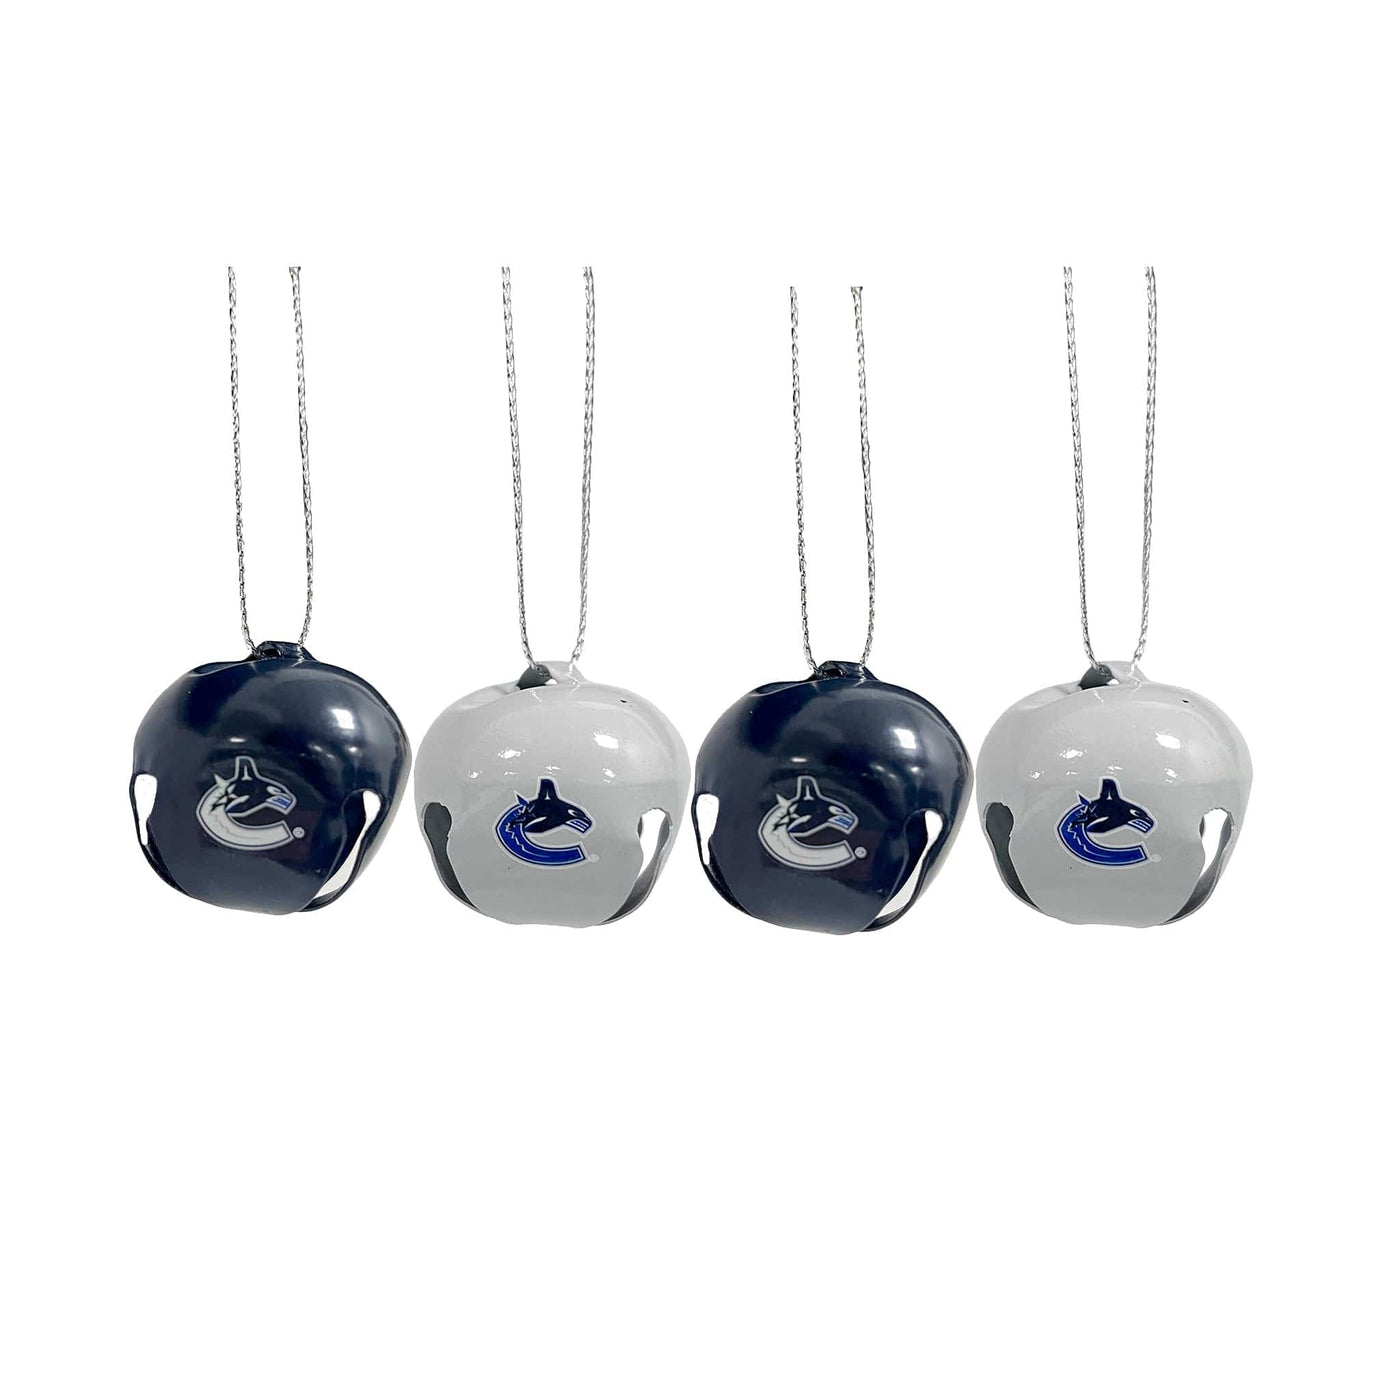 Forever Collectibles NHL Bell Ornament Set (4-Pack) - Vancouver Canucks - TheHockeyShop.com